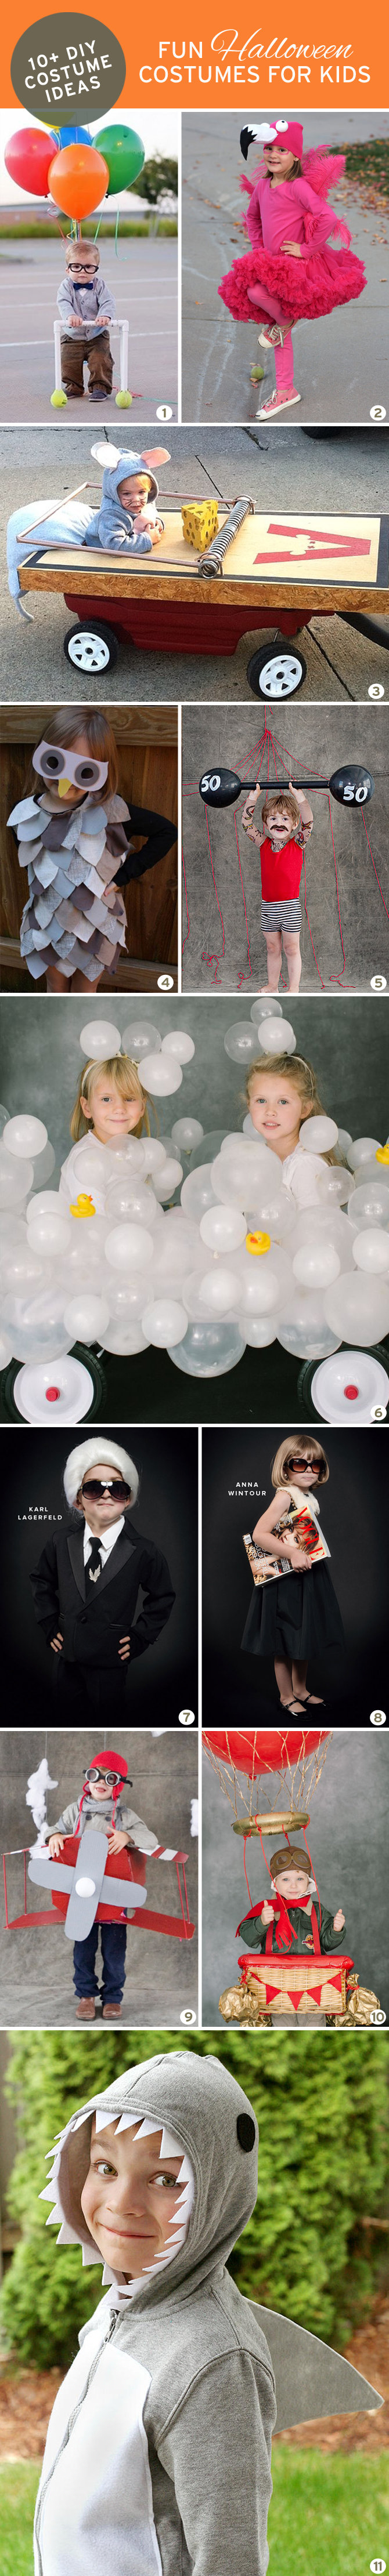 10+ Super fun and easy DIY costume ideas for kids this Halloween.